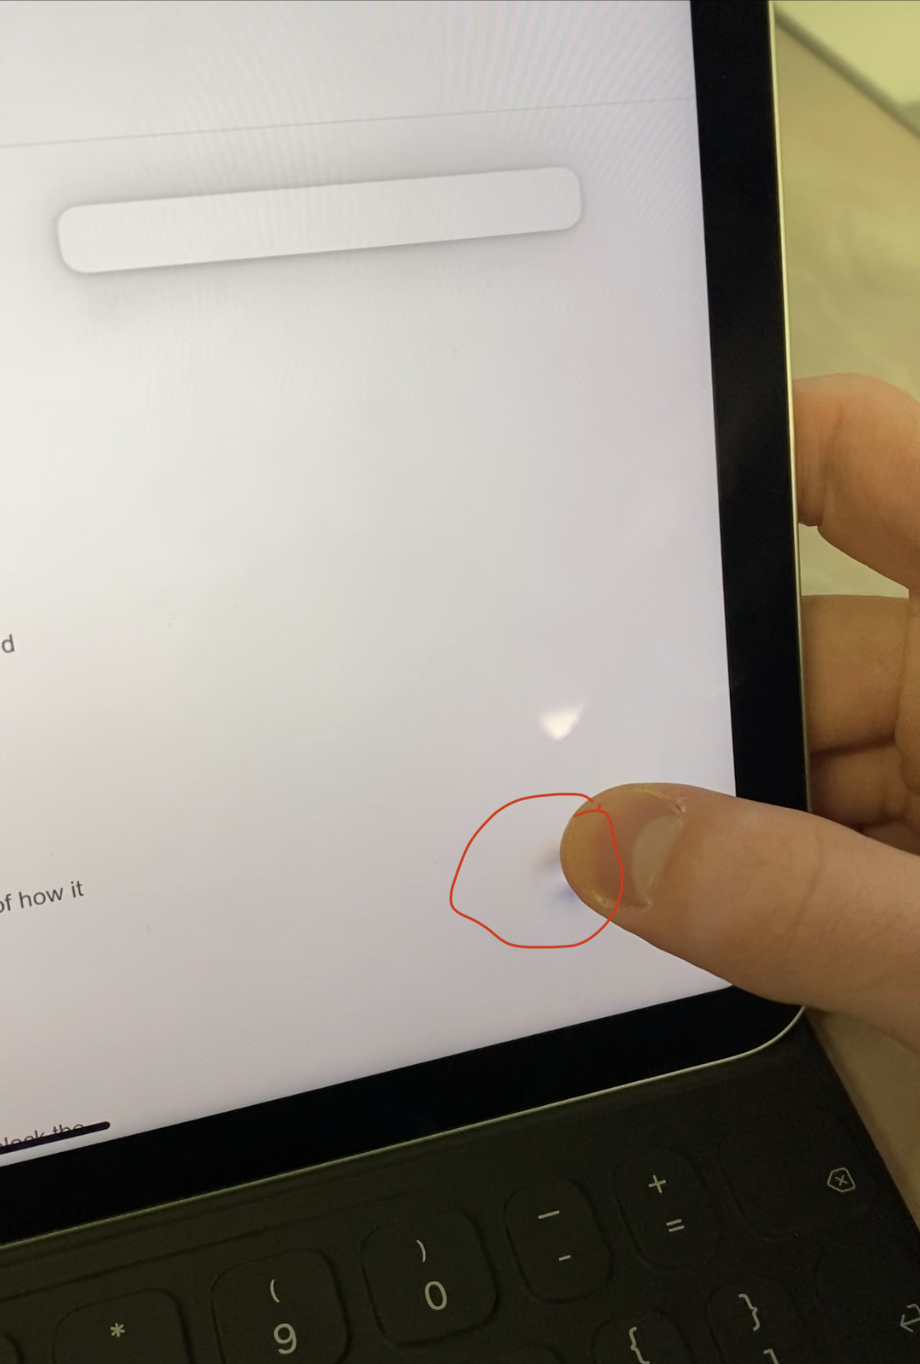 Does pressing the iPad screen damage it?